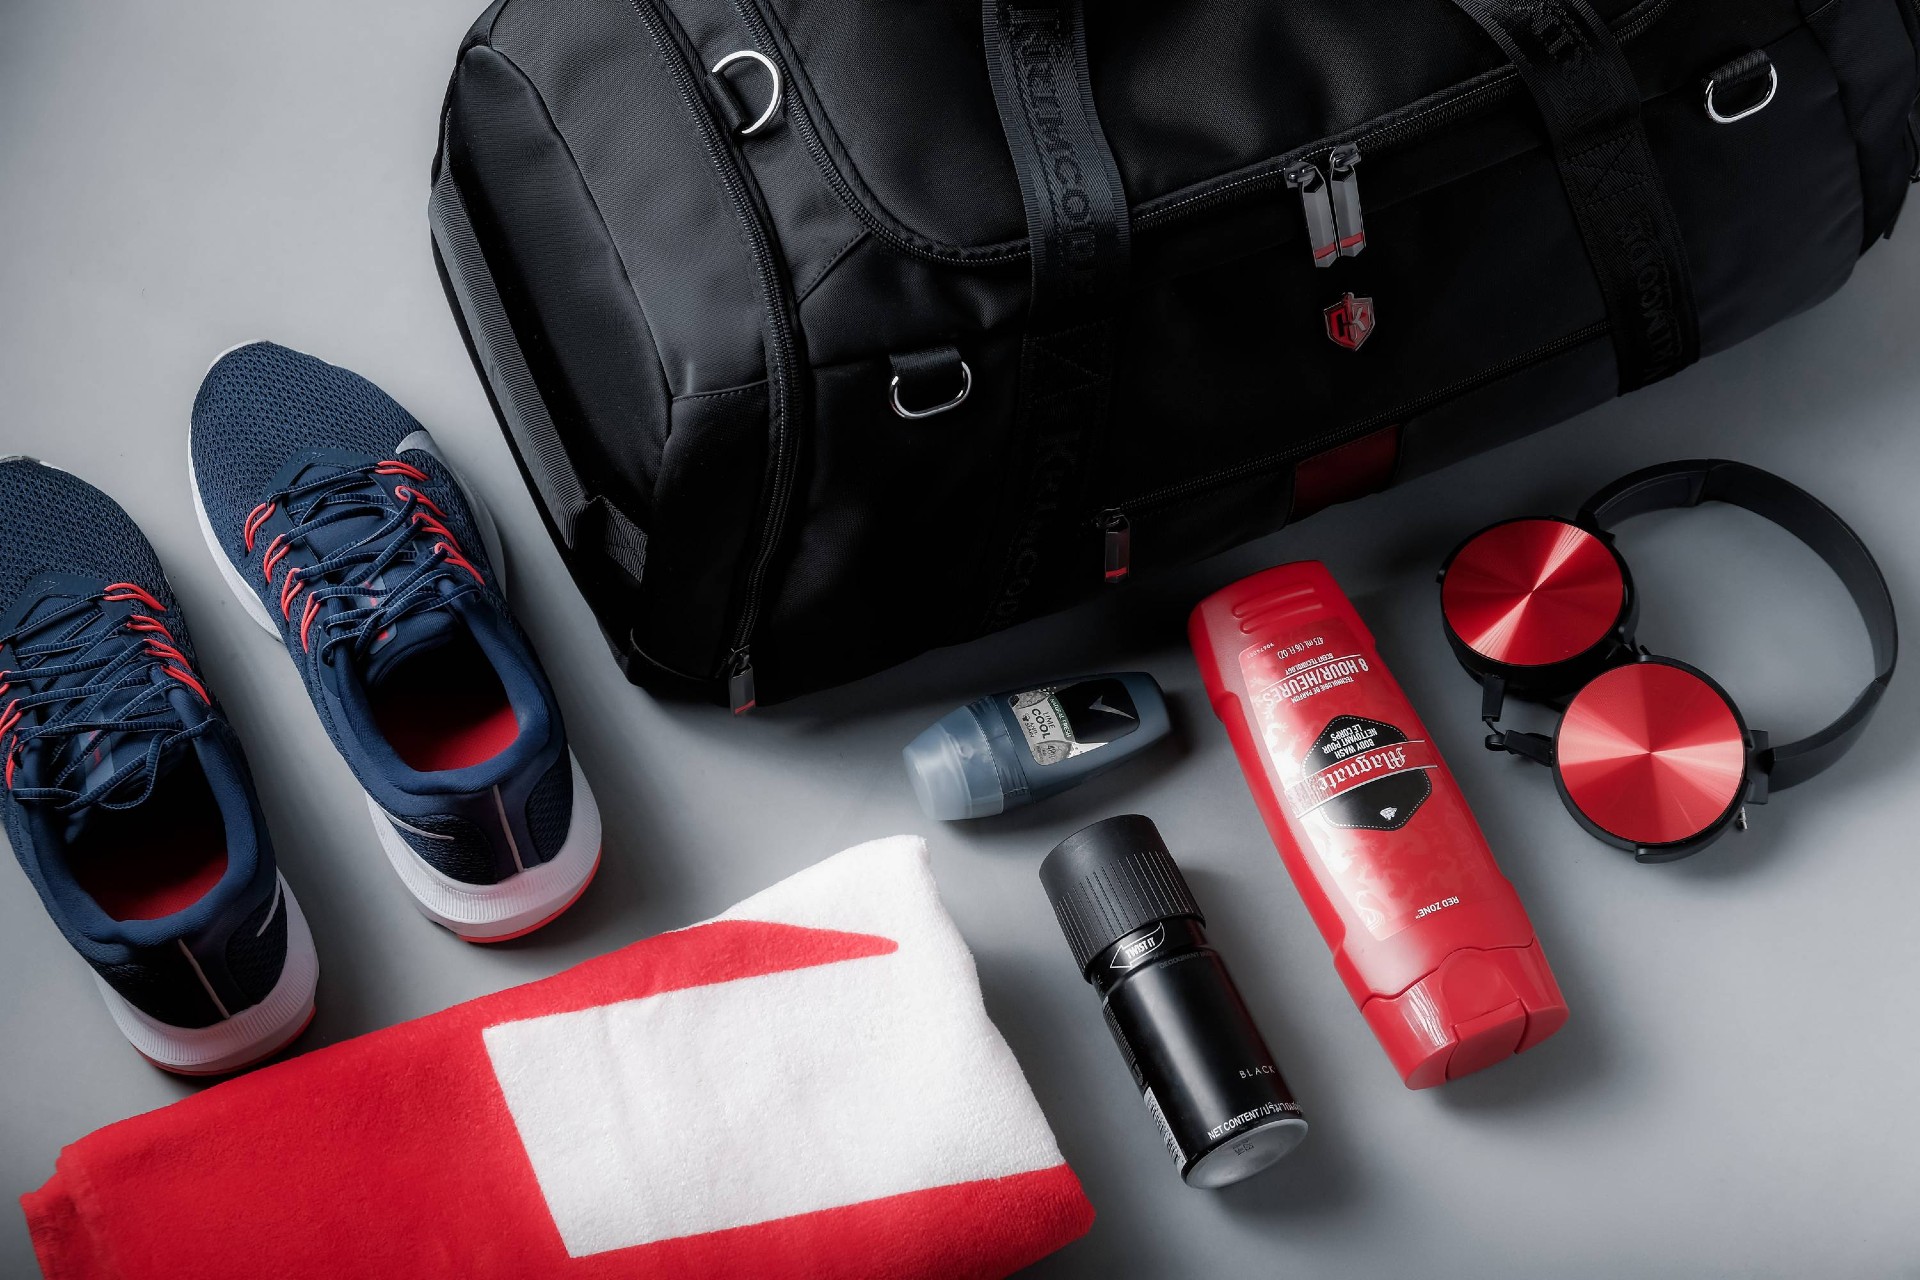 Gym essentials: What to bring to the gym